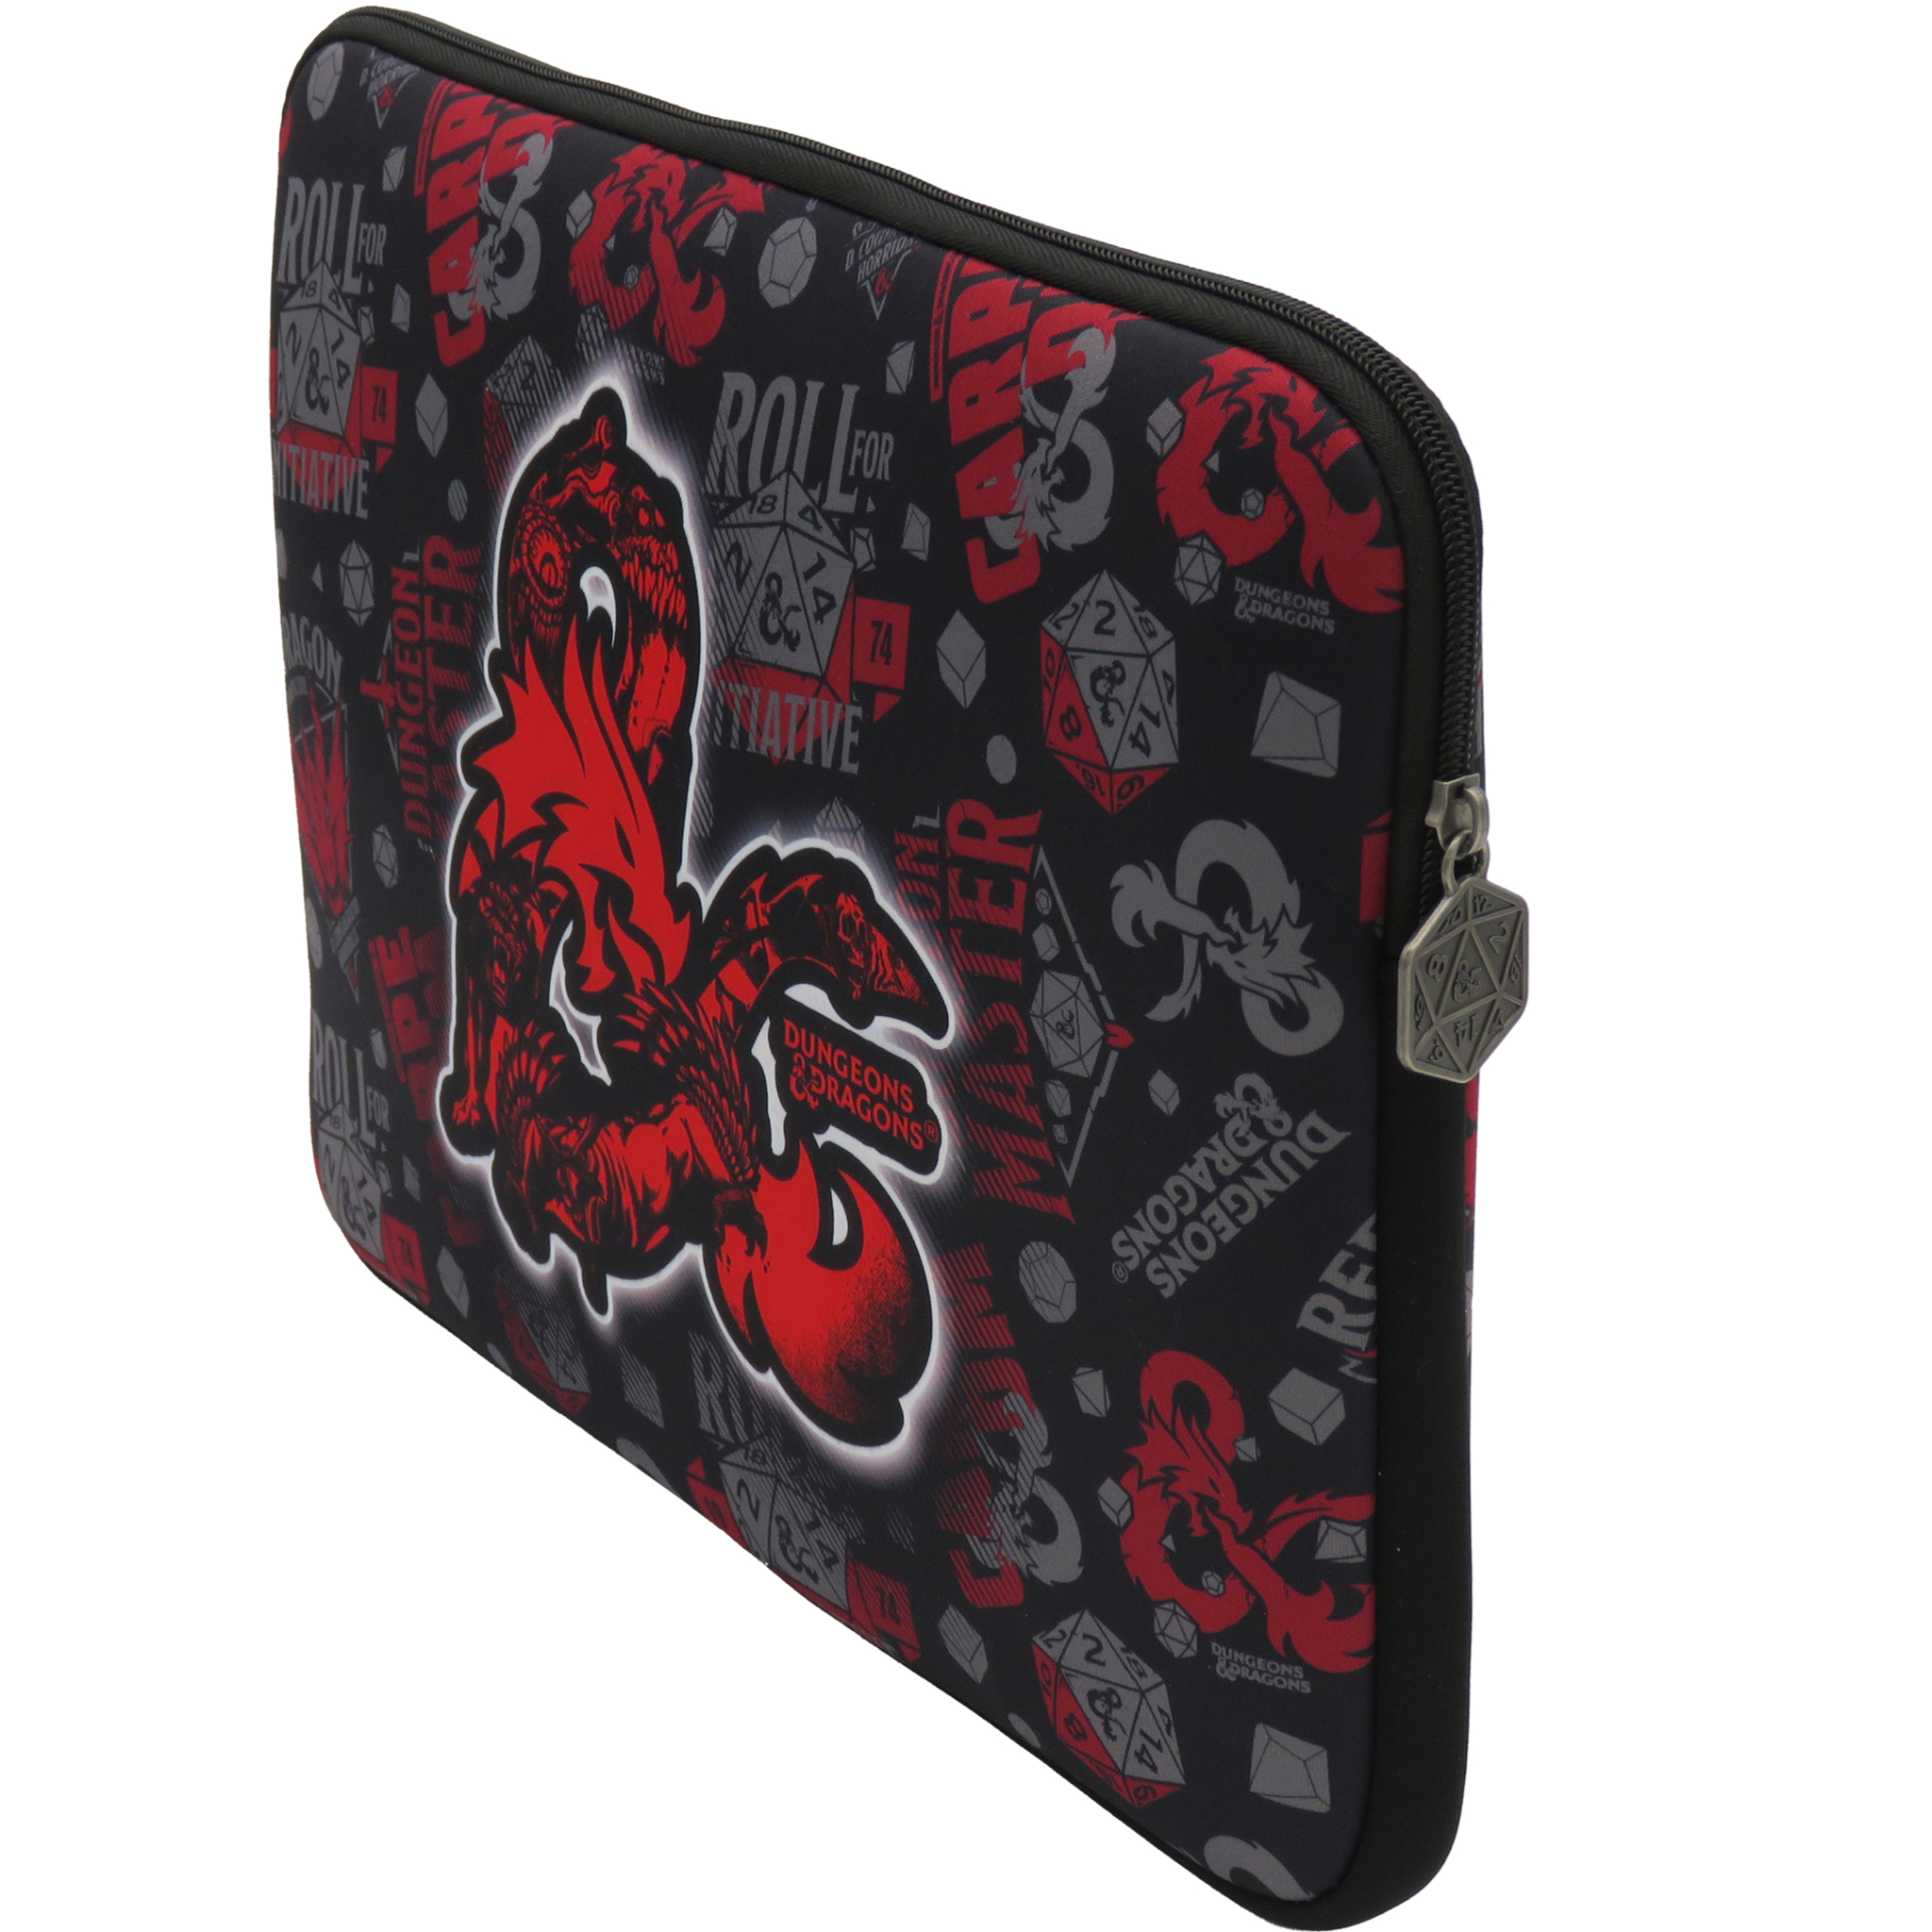 Dungeons & Dragons Laptop Hoes 14", Monsters - 36 x 26 x 2 cm - Polyester